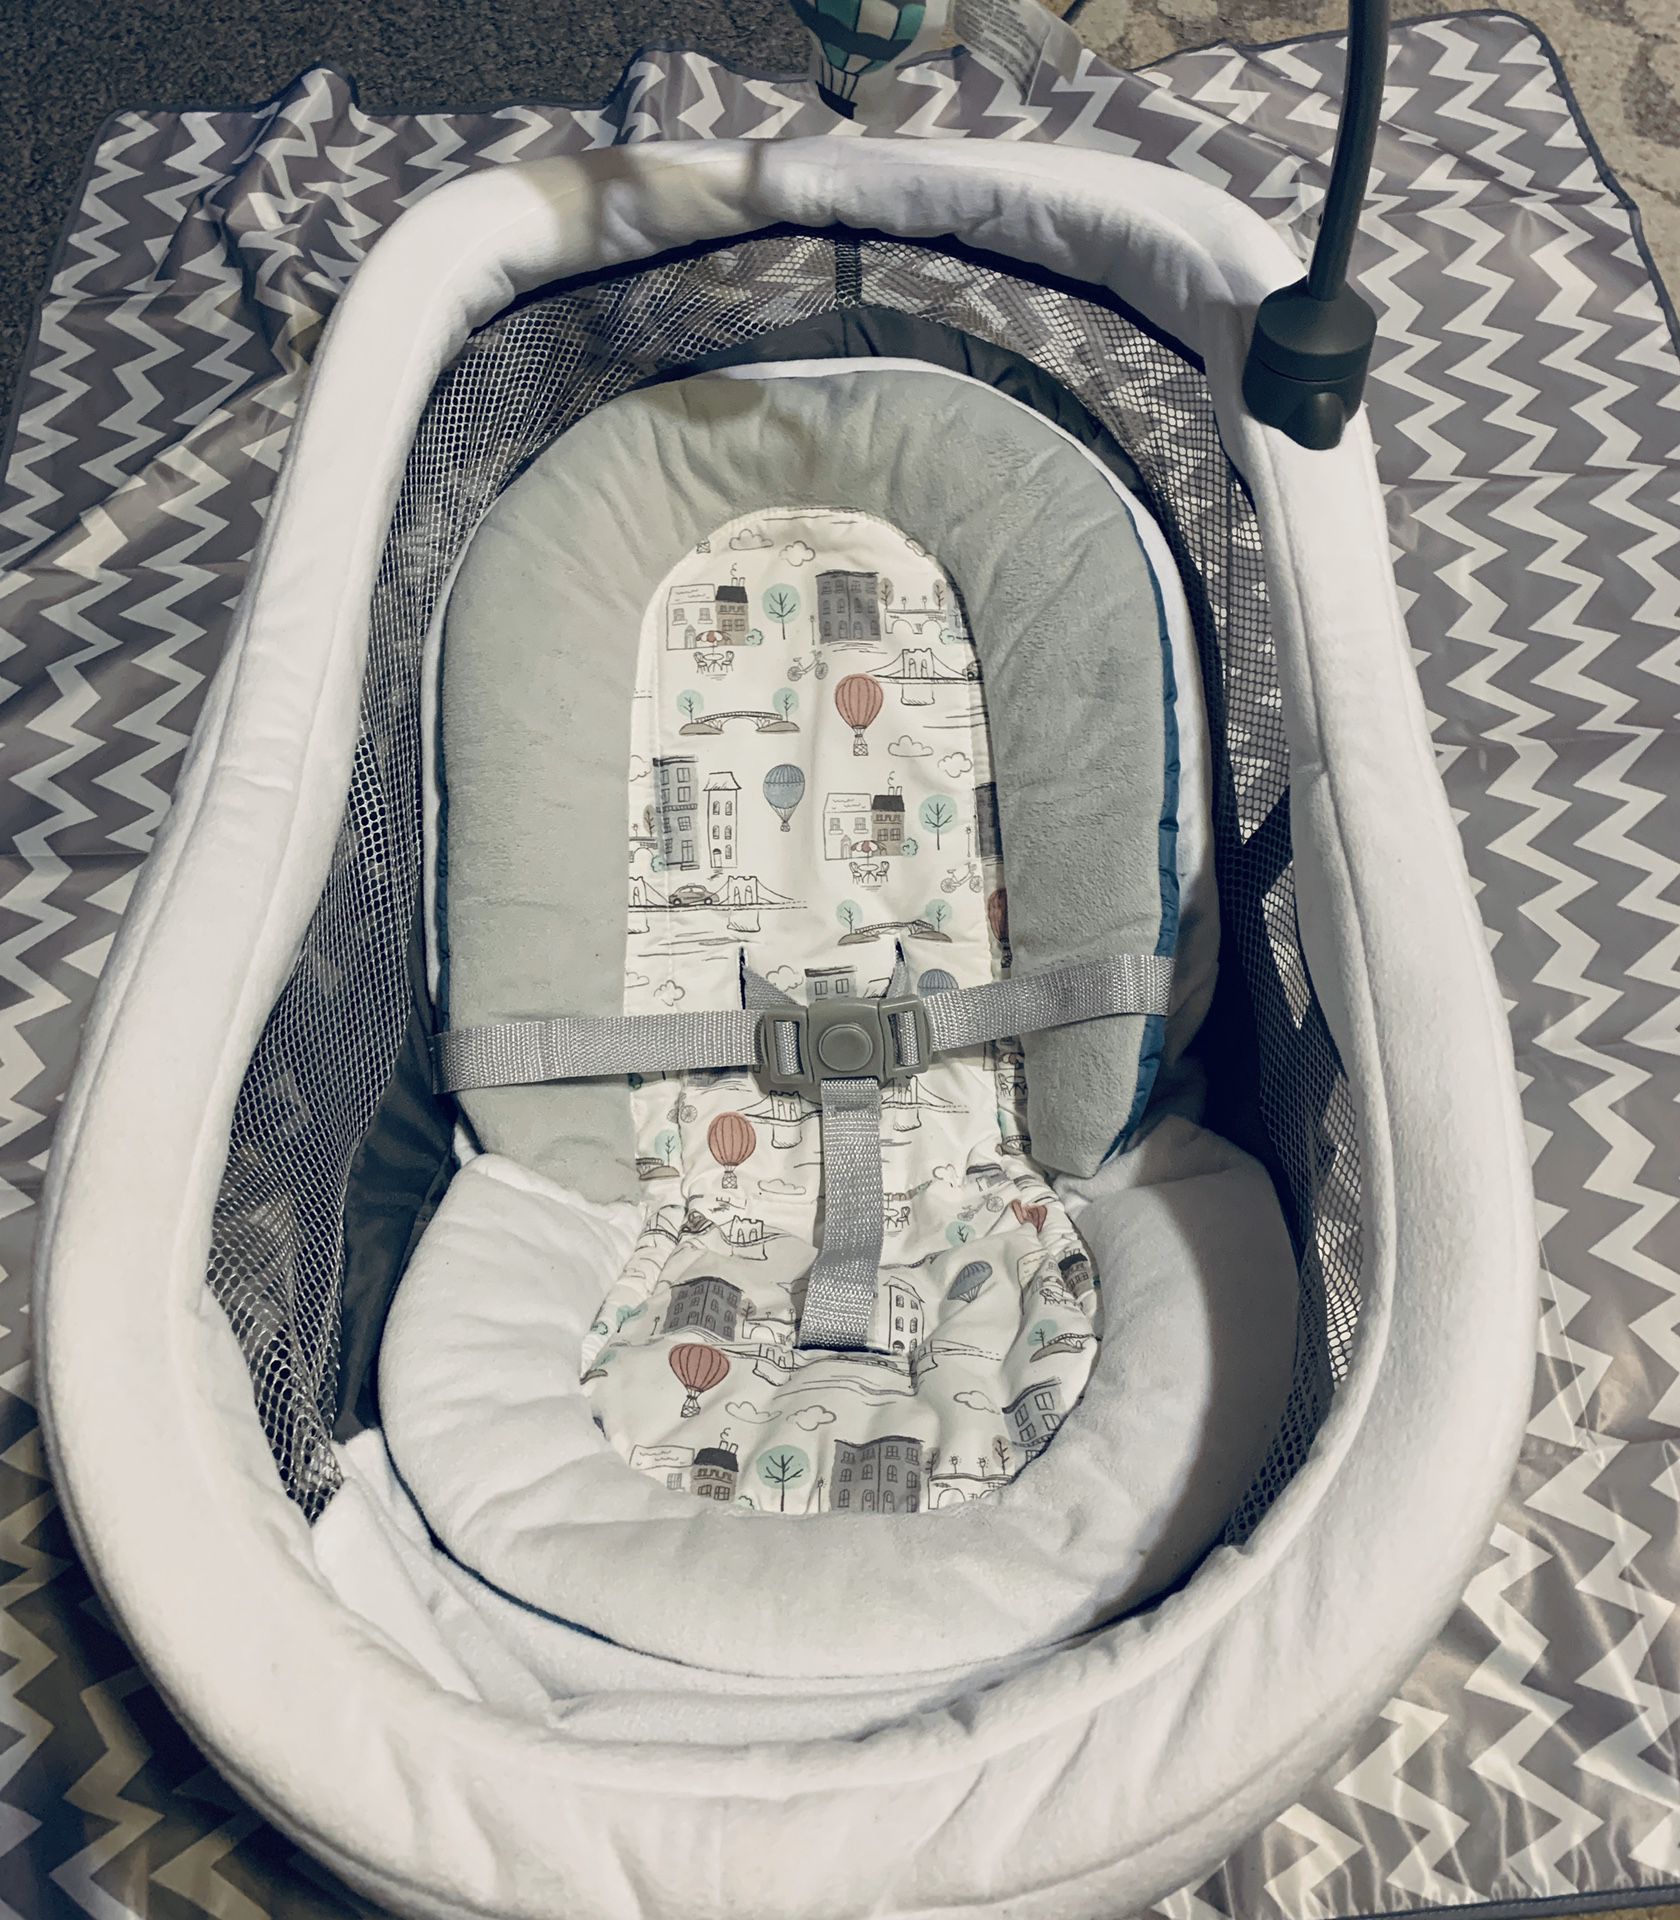 GRACO DREAMGLIDE Duo Glider Baby Swing/Gliding Bassinet Gently Used